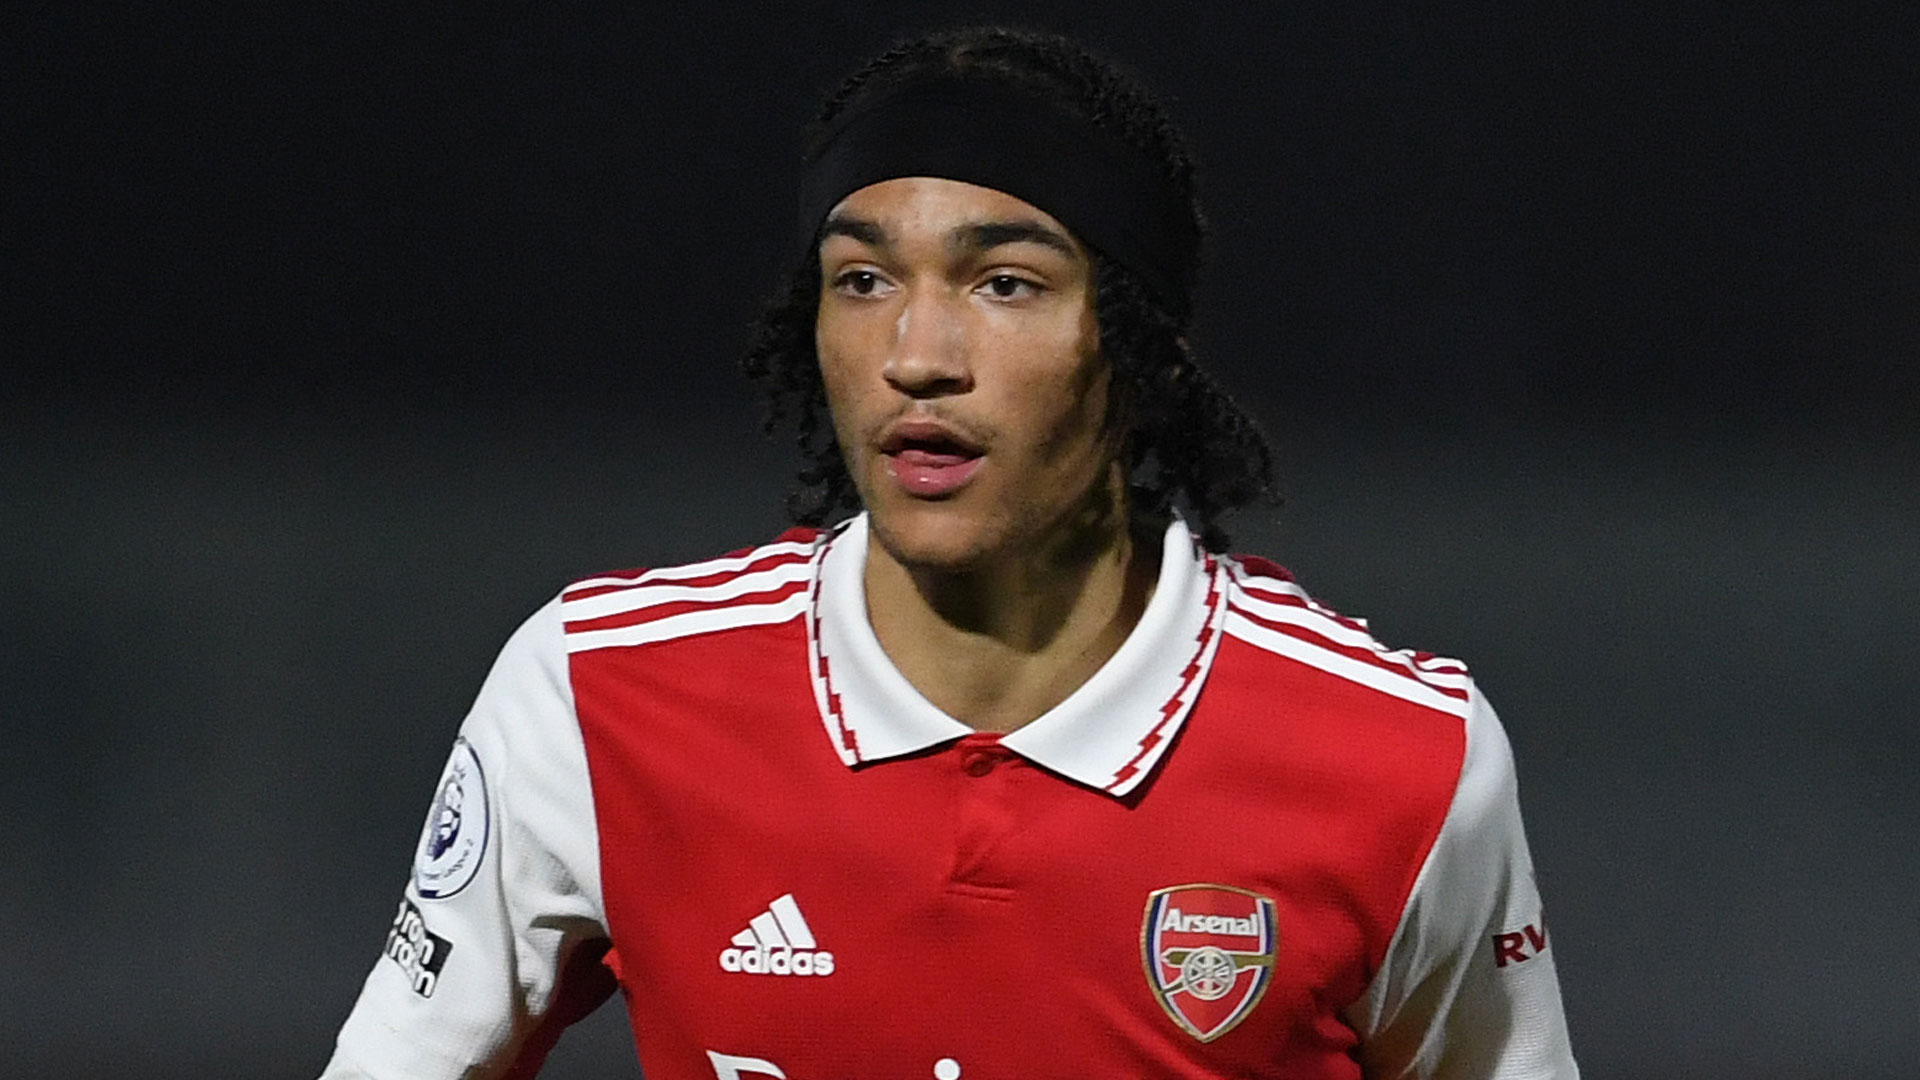 Arsenal youngster announces he’s quitting club after 13 years in emotional message about ‘growing from a boy to a man’ [Video]